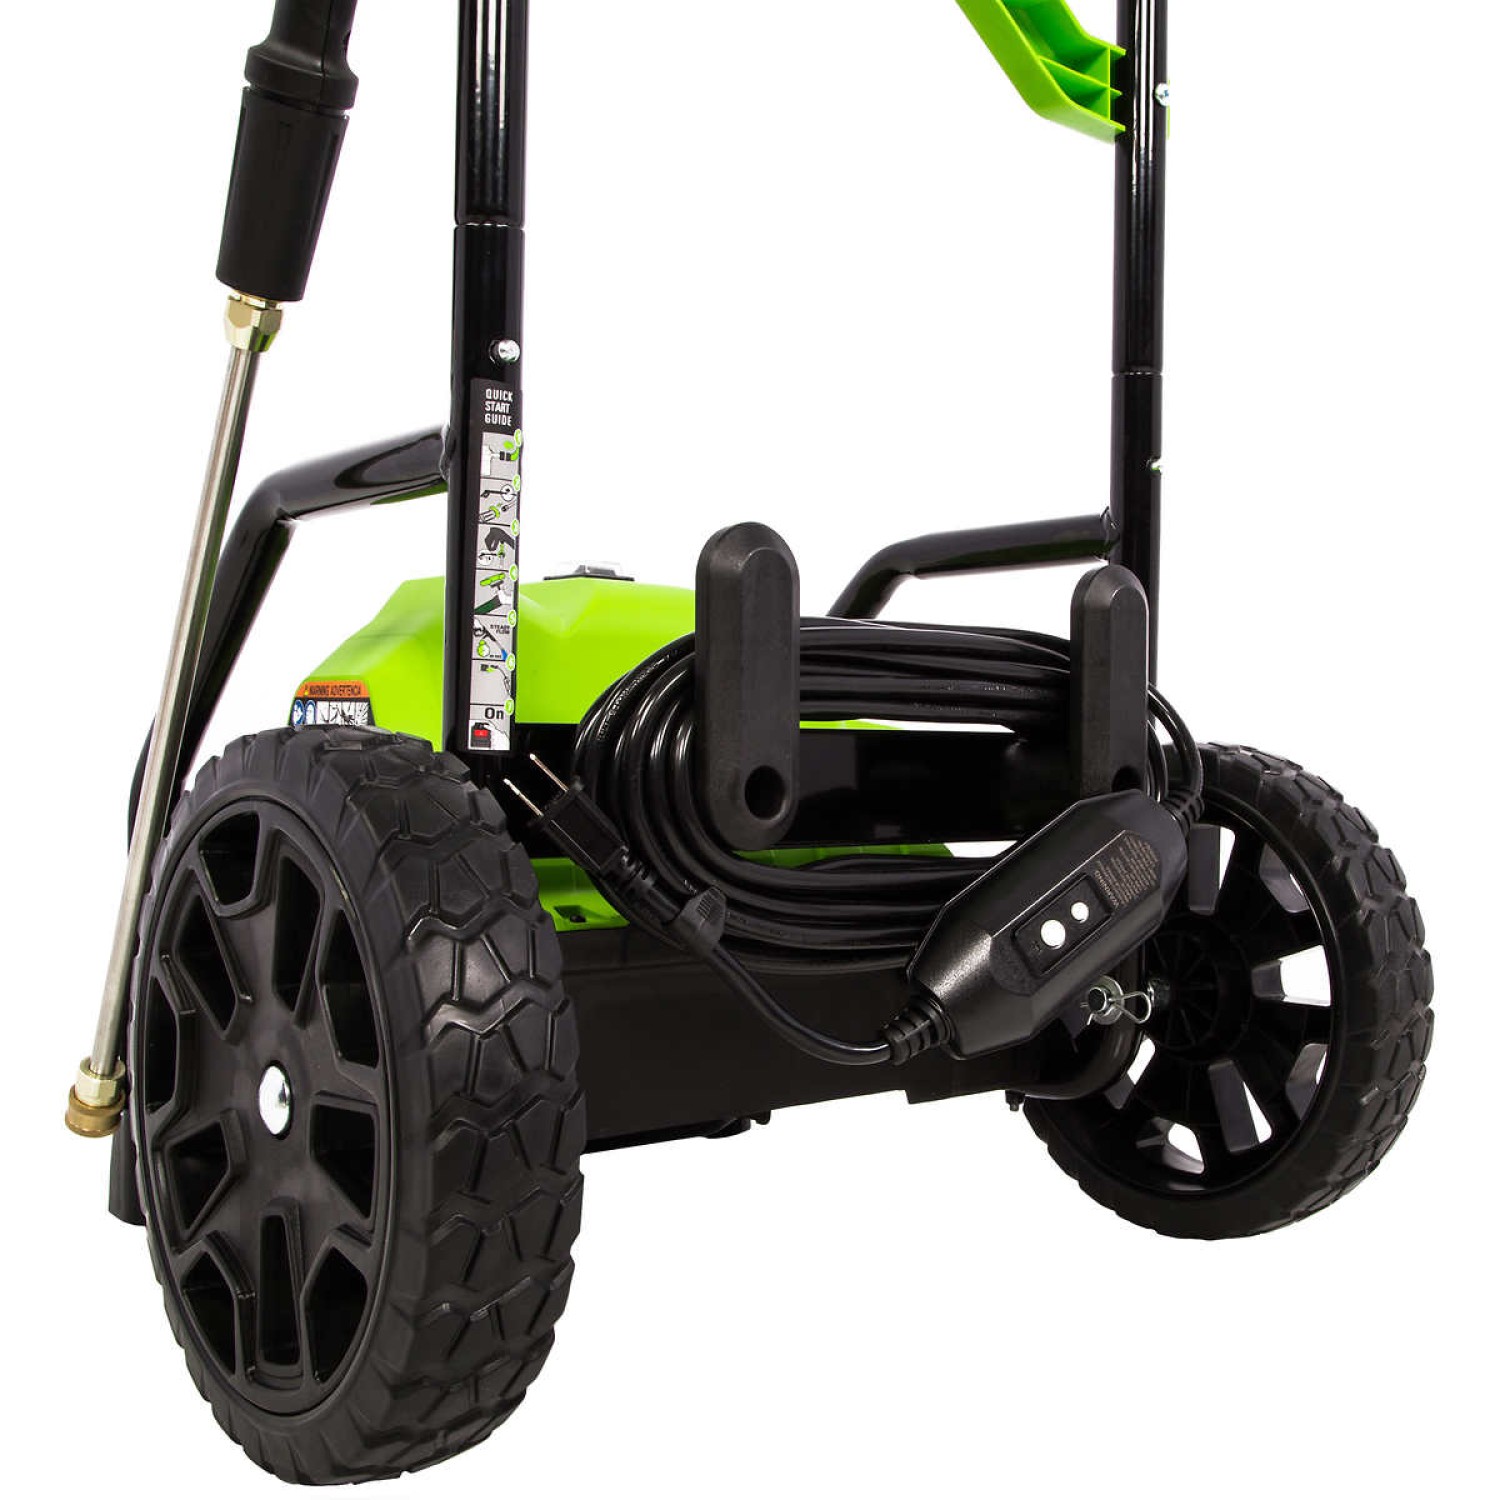 greenworks 2000 psi pressure washer review